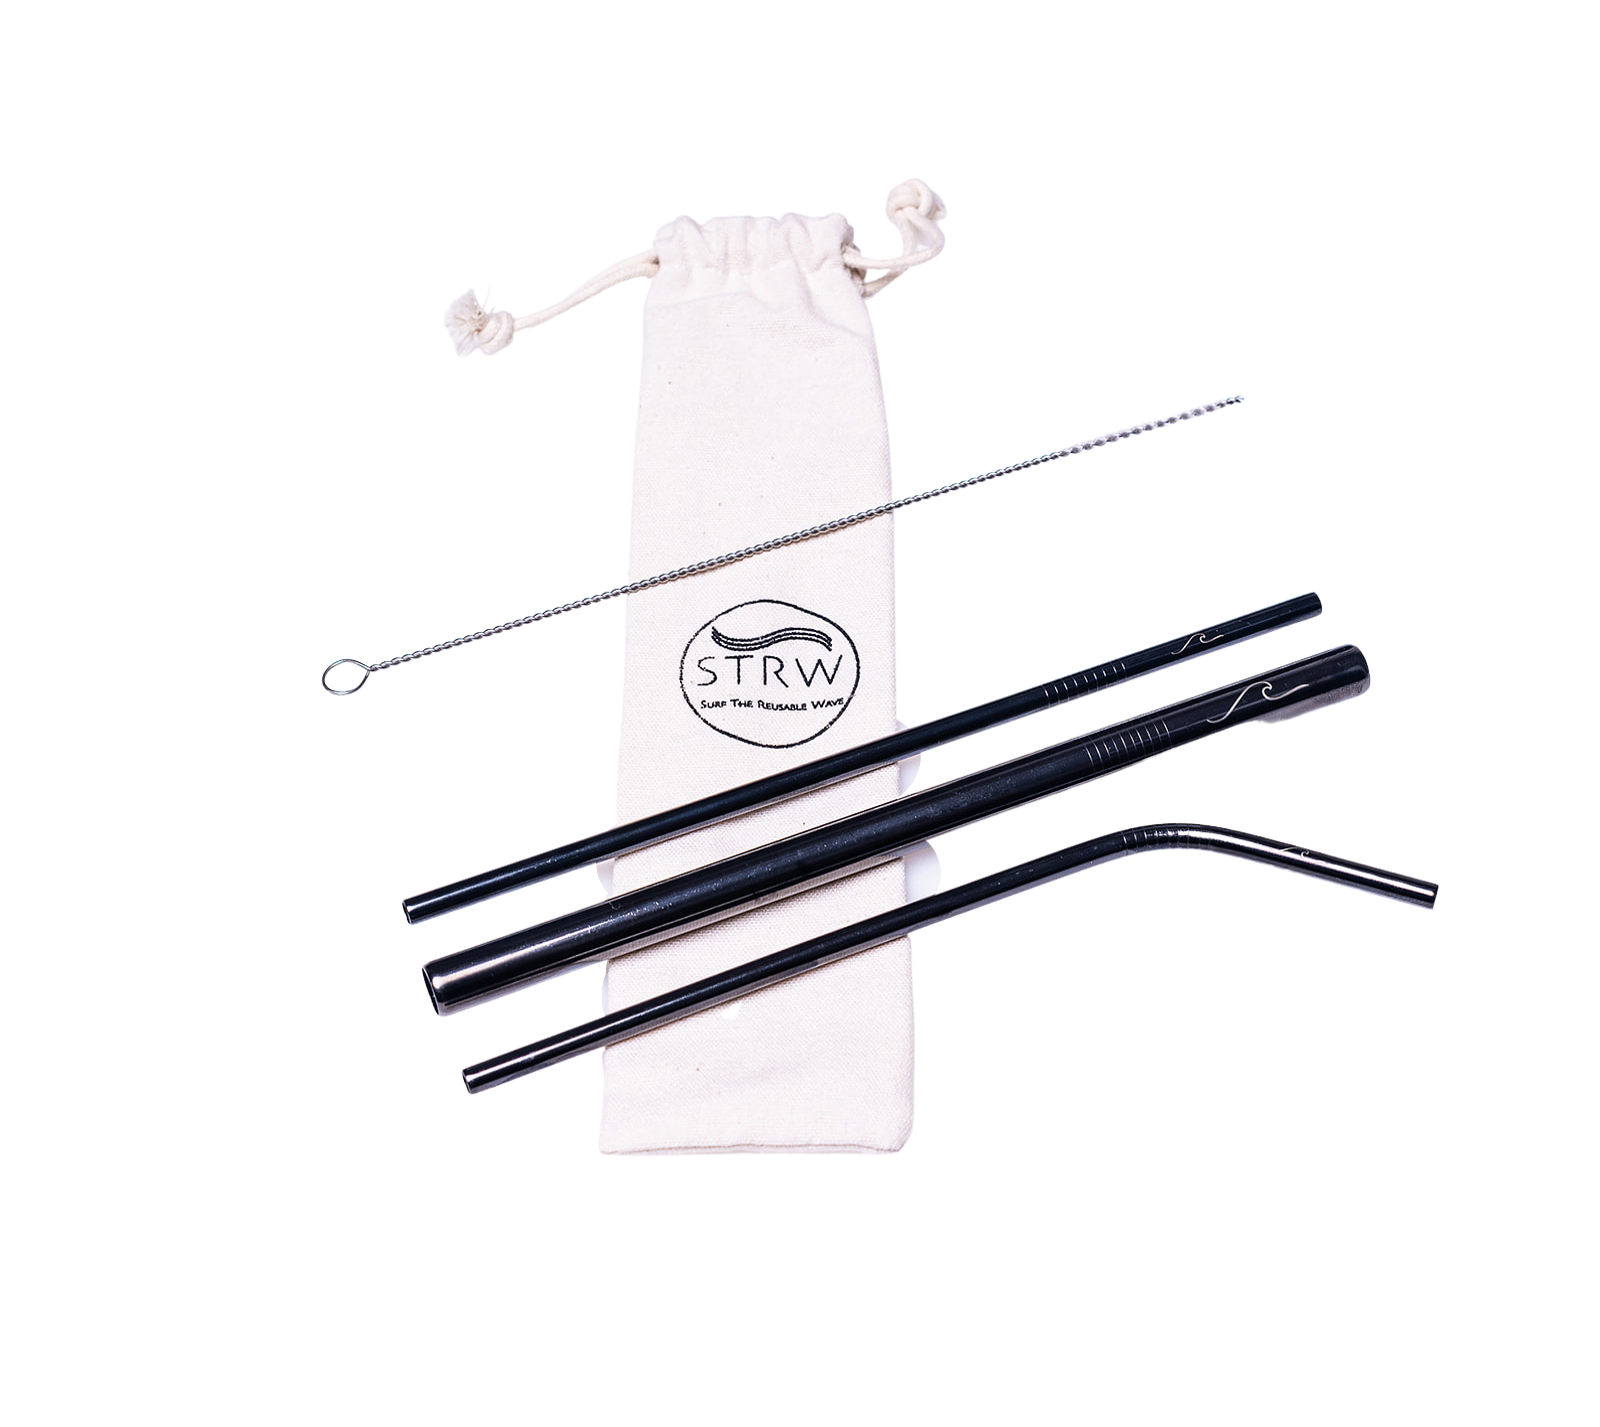 STRW Co. Reusable 100% stainless straws 3 in 1 variety pack